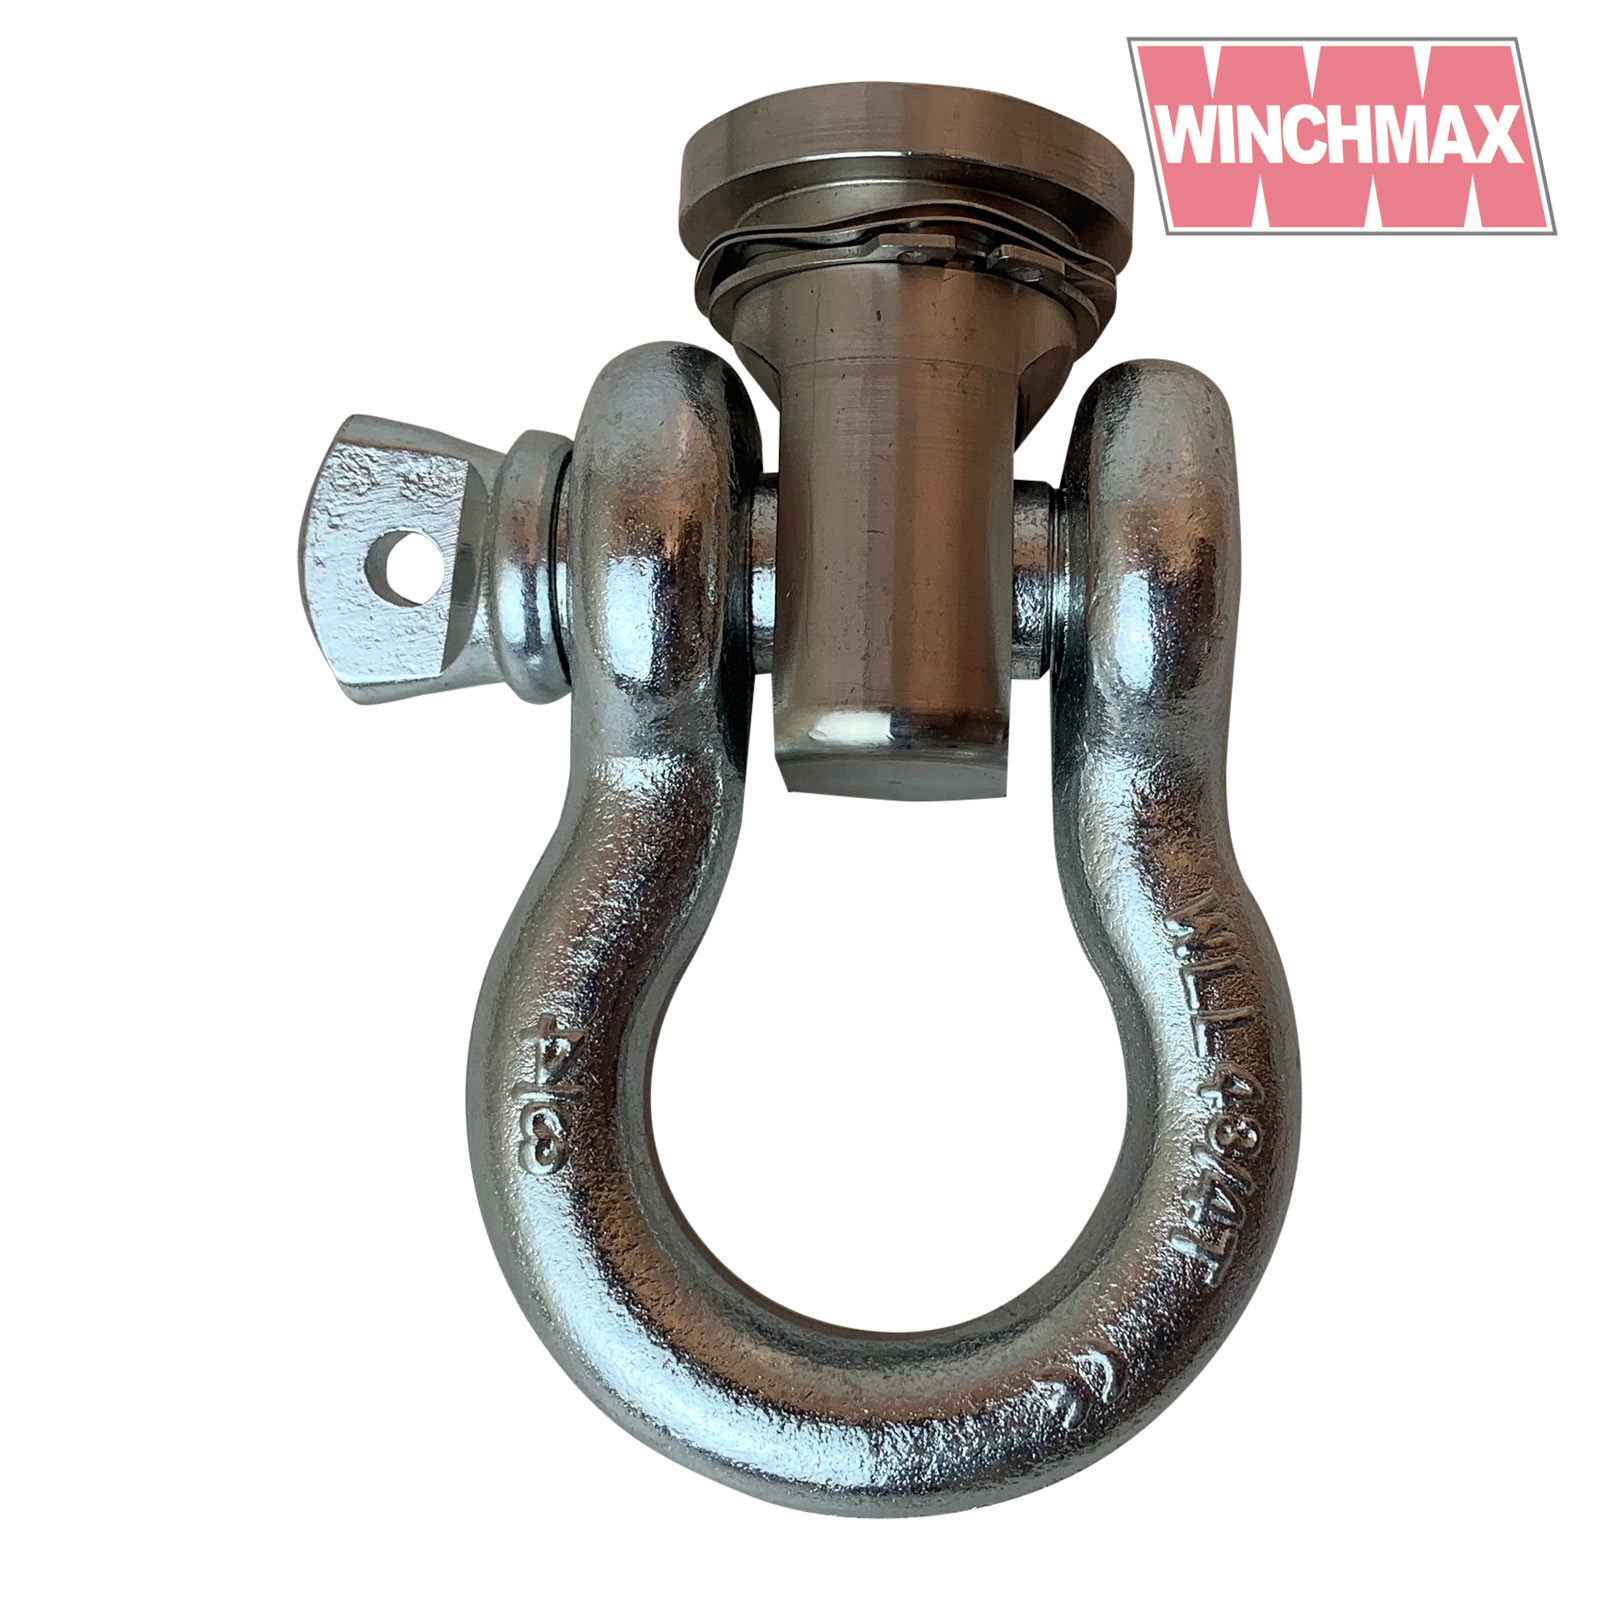 Swivel recovery eye 36mm for winch bumper stainless steel  shackle and circlip 